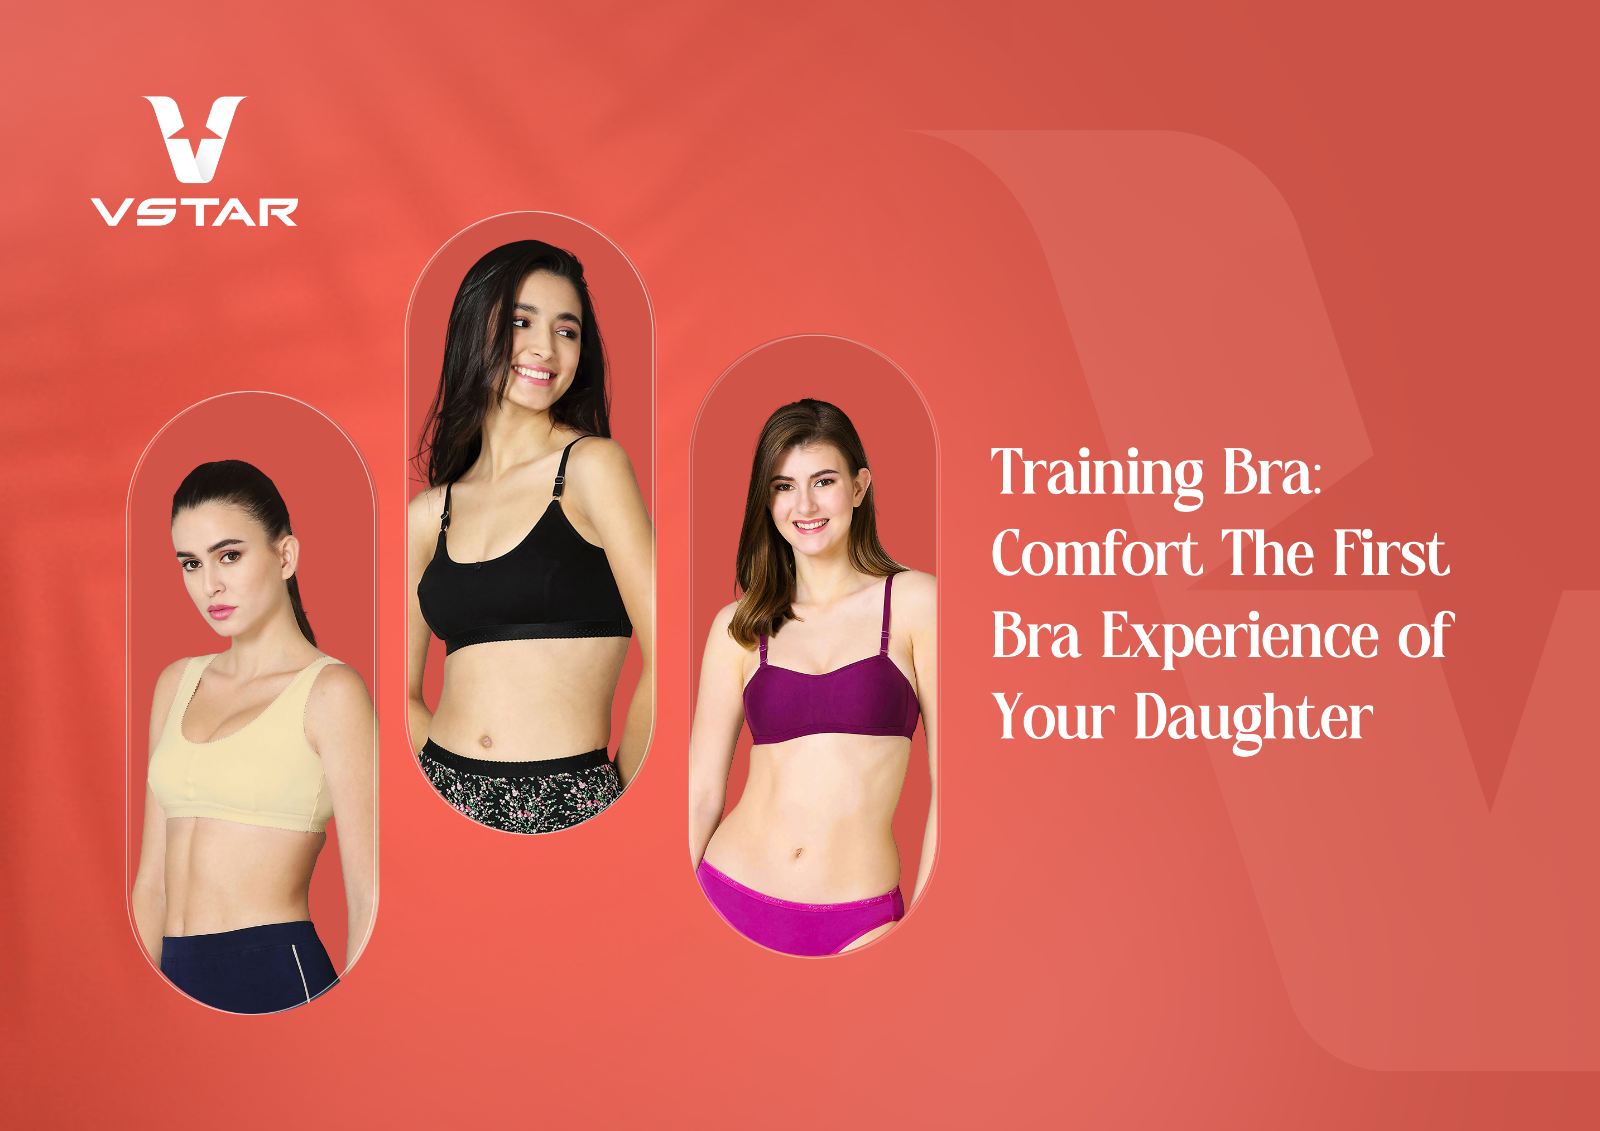 Buying a Training Bra - Know All About Training Bras